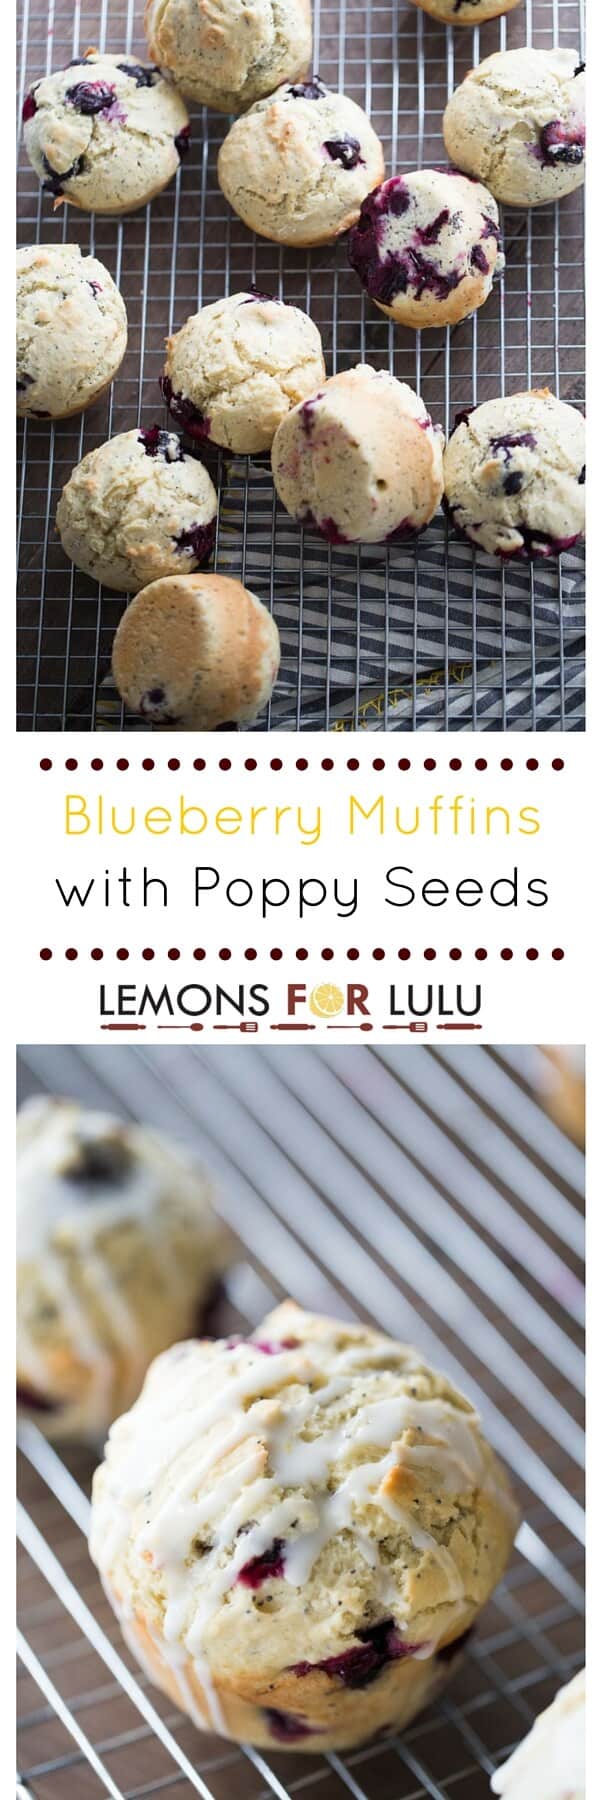 Breakfast will be the stand out meal when these blueberry muffins are served! These soft and tender muffins are speckled with poppy seeds and drizzled with a tangy lemon glaze. The combination of sweet and tart bursts through in each bite!